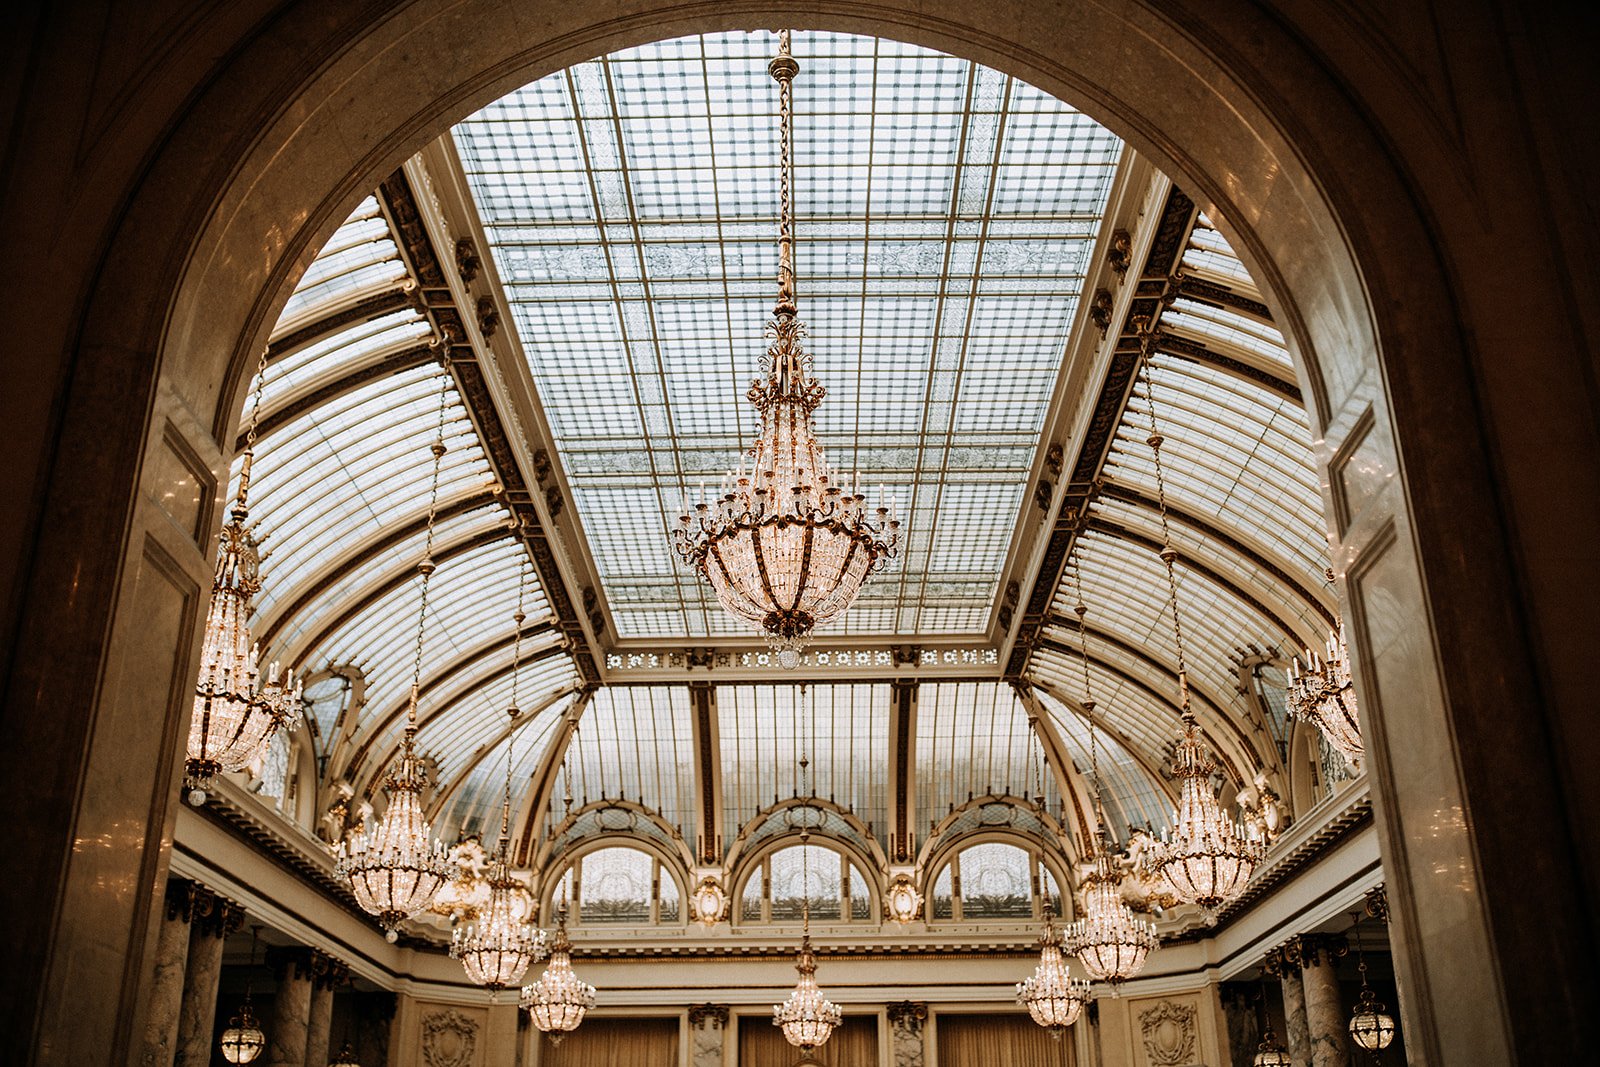  ceiling of grand architecture with chandeliers  